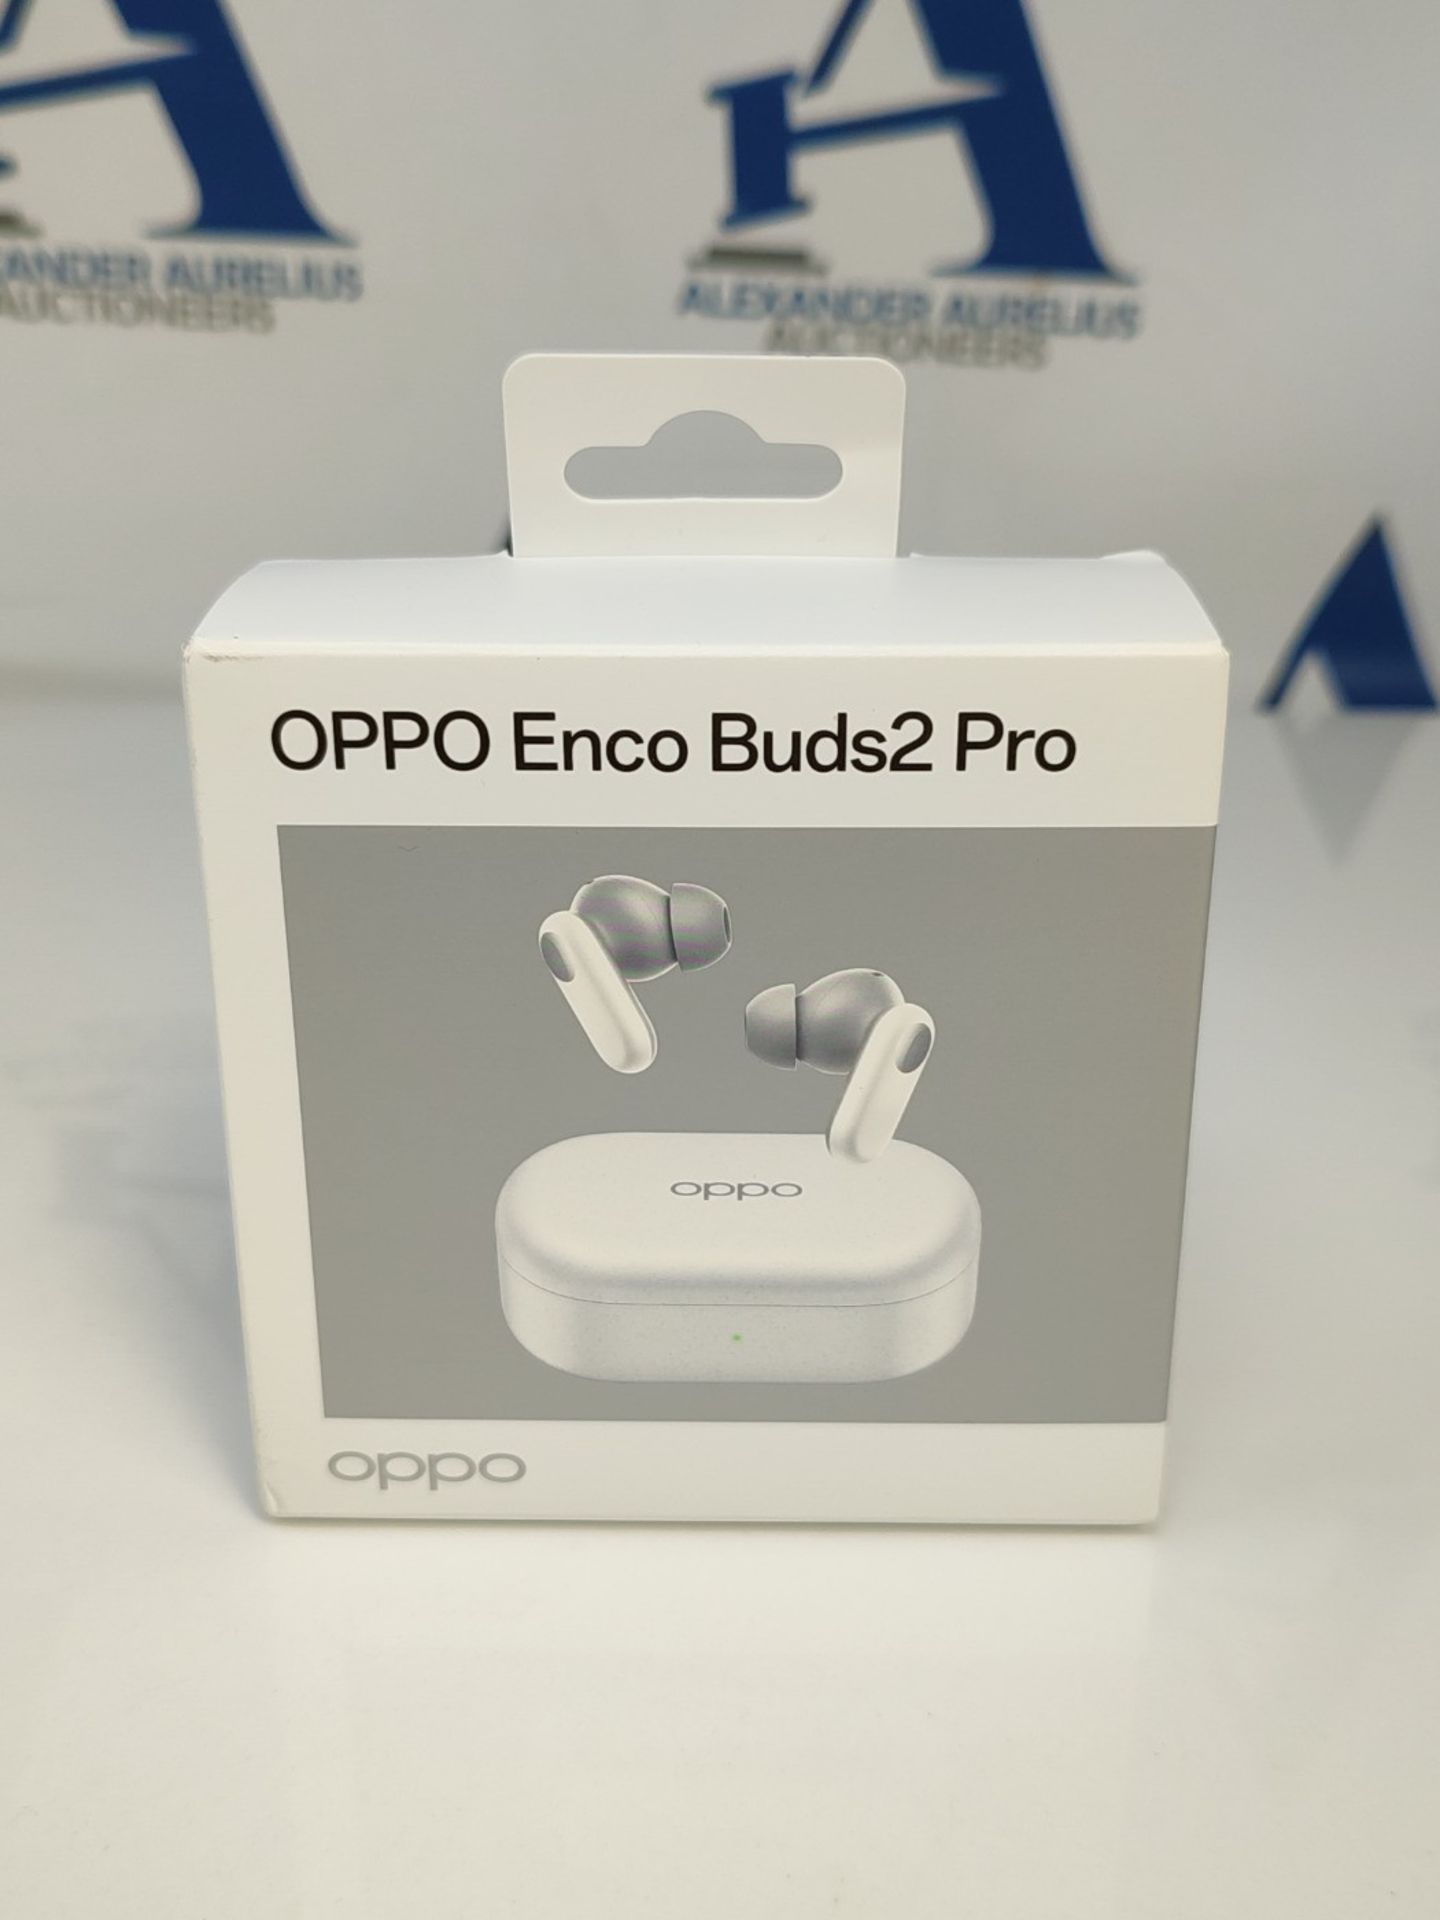 OPPO Enco Buds2 Pro True Wireless Earbuds, 38h Battery Life, 12.4mm Drivers, Bluetooth - Image 2 of 3